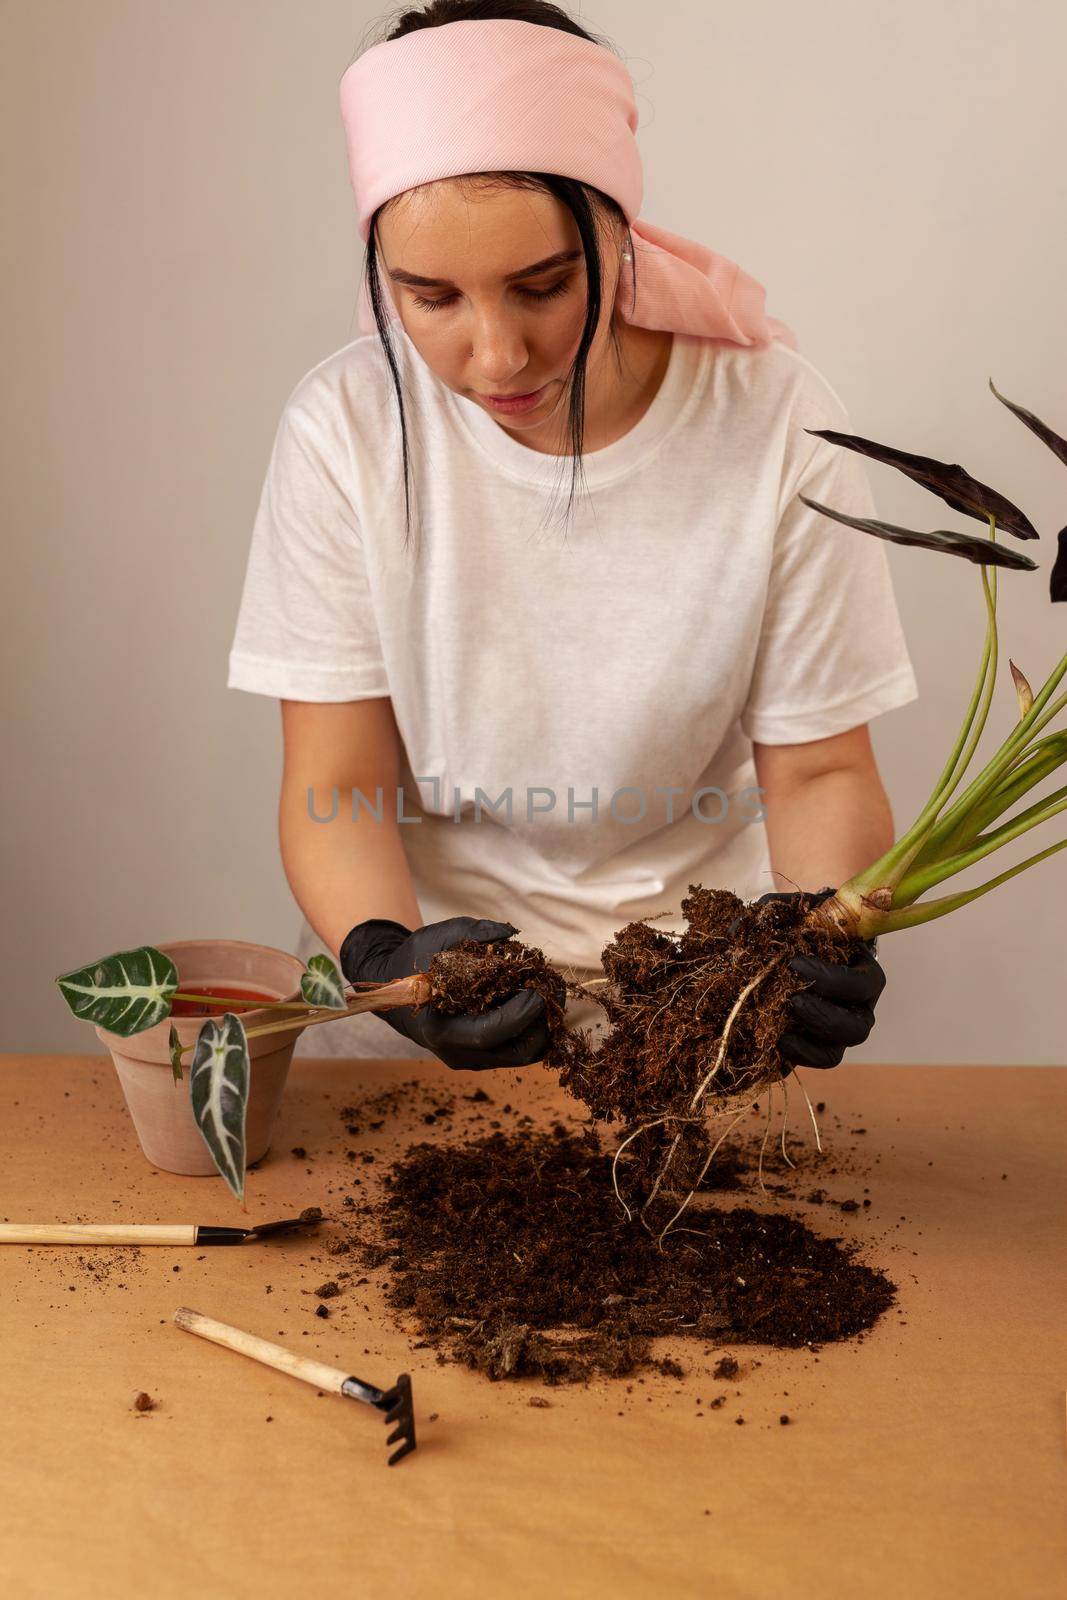 Transplanting a houseplant into a new flower pot. Girls's hands in gloves working with soil and roots of Alocasia Bambinoarrow plant.